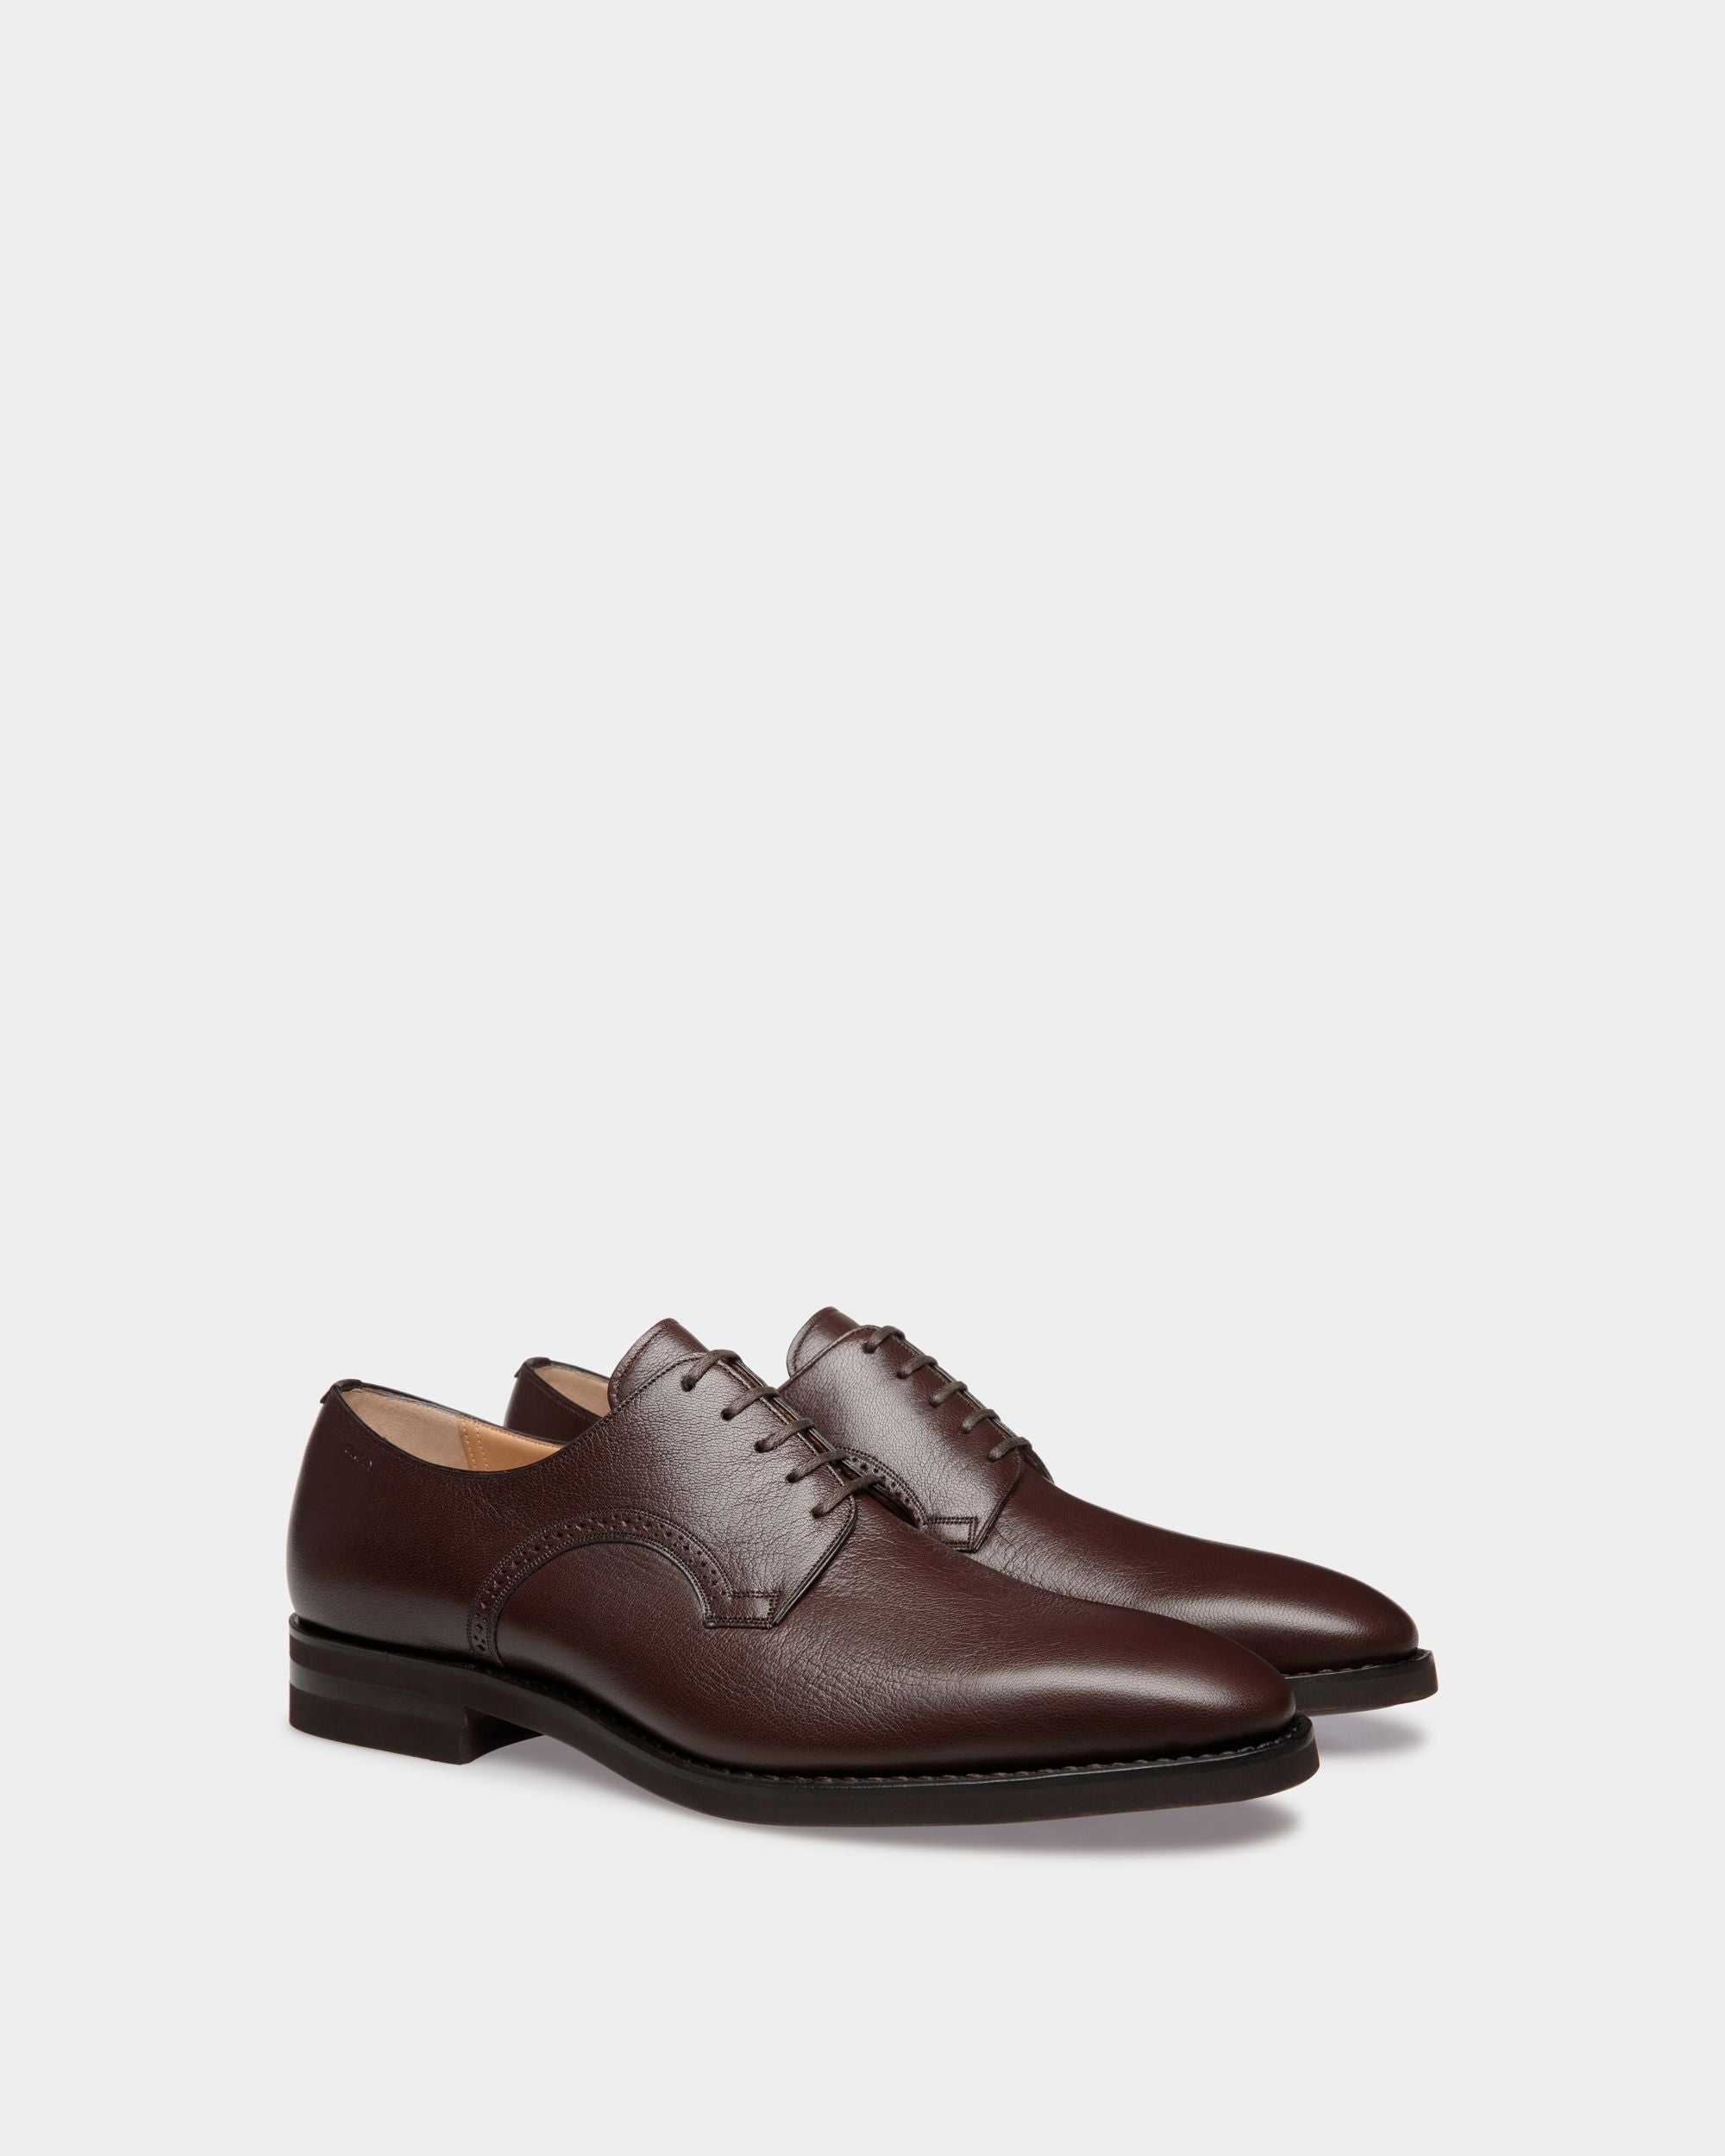 Scribe | Men's Derby in Brown Grained Leather | Bally | Still Life 3/4 Back